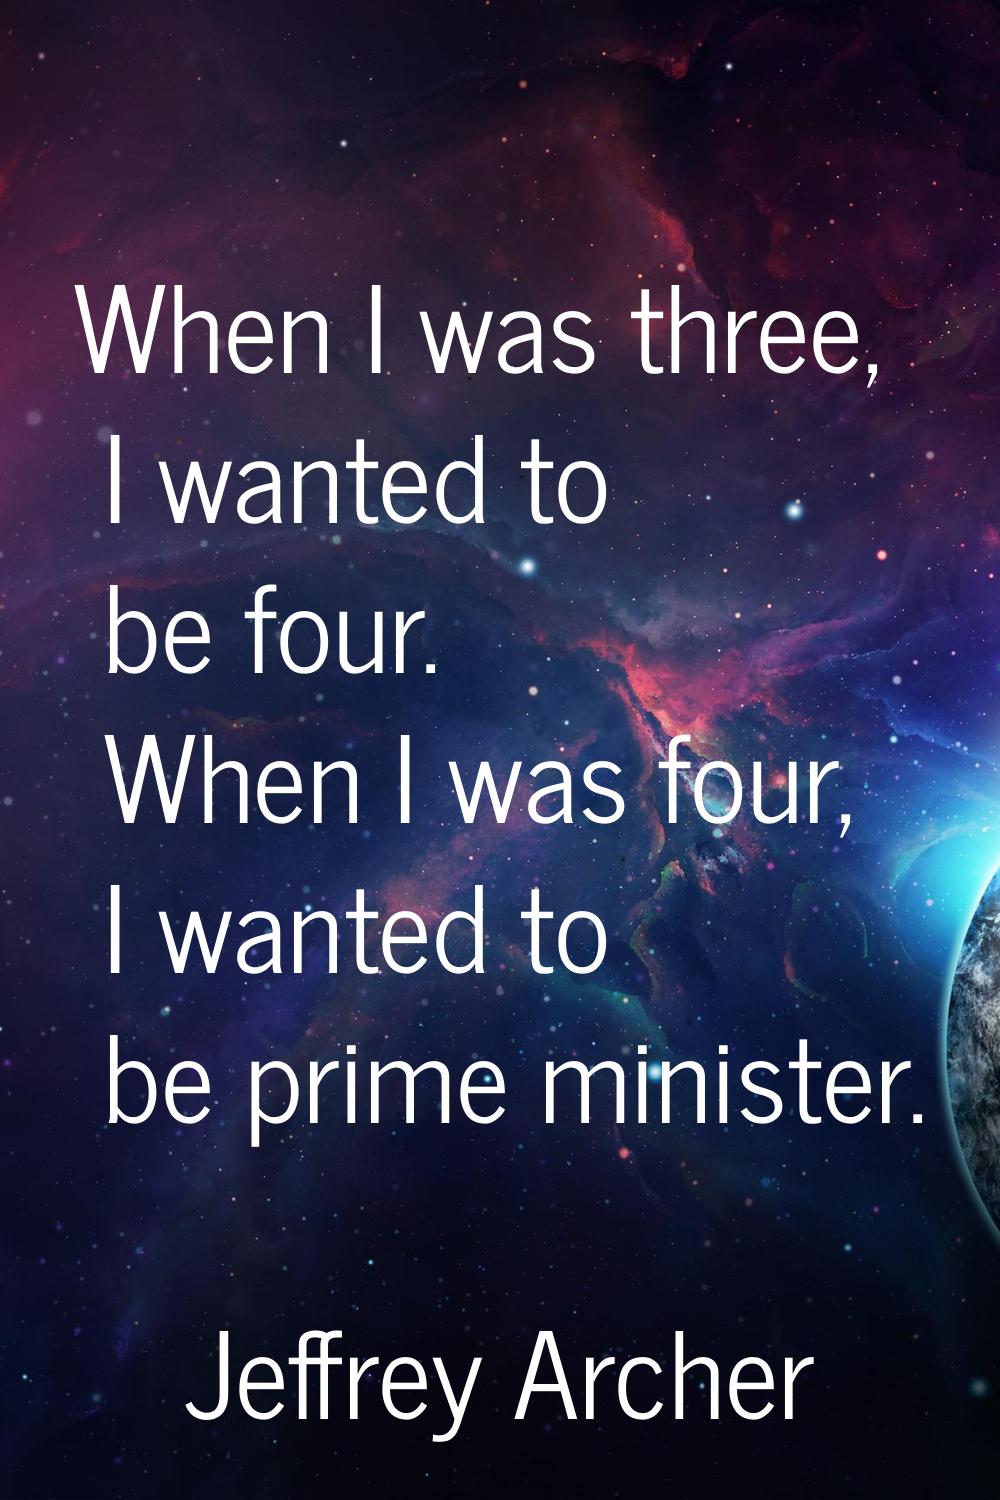 When I was three, I wanted to be four. When I was four, I wanted to be prime minister.